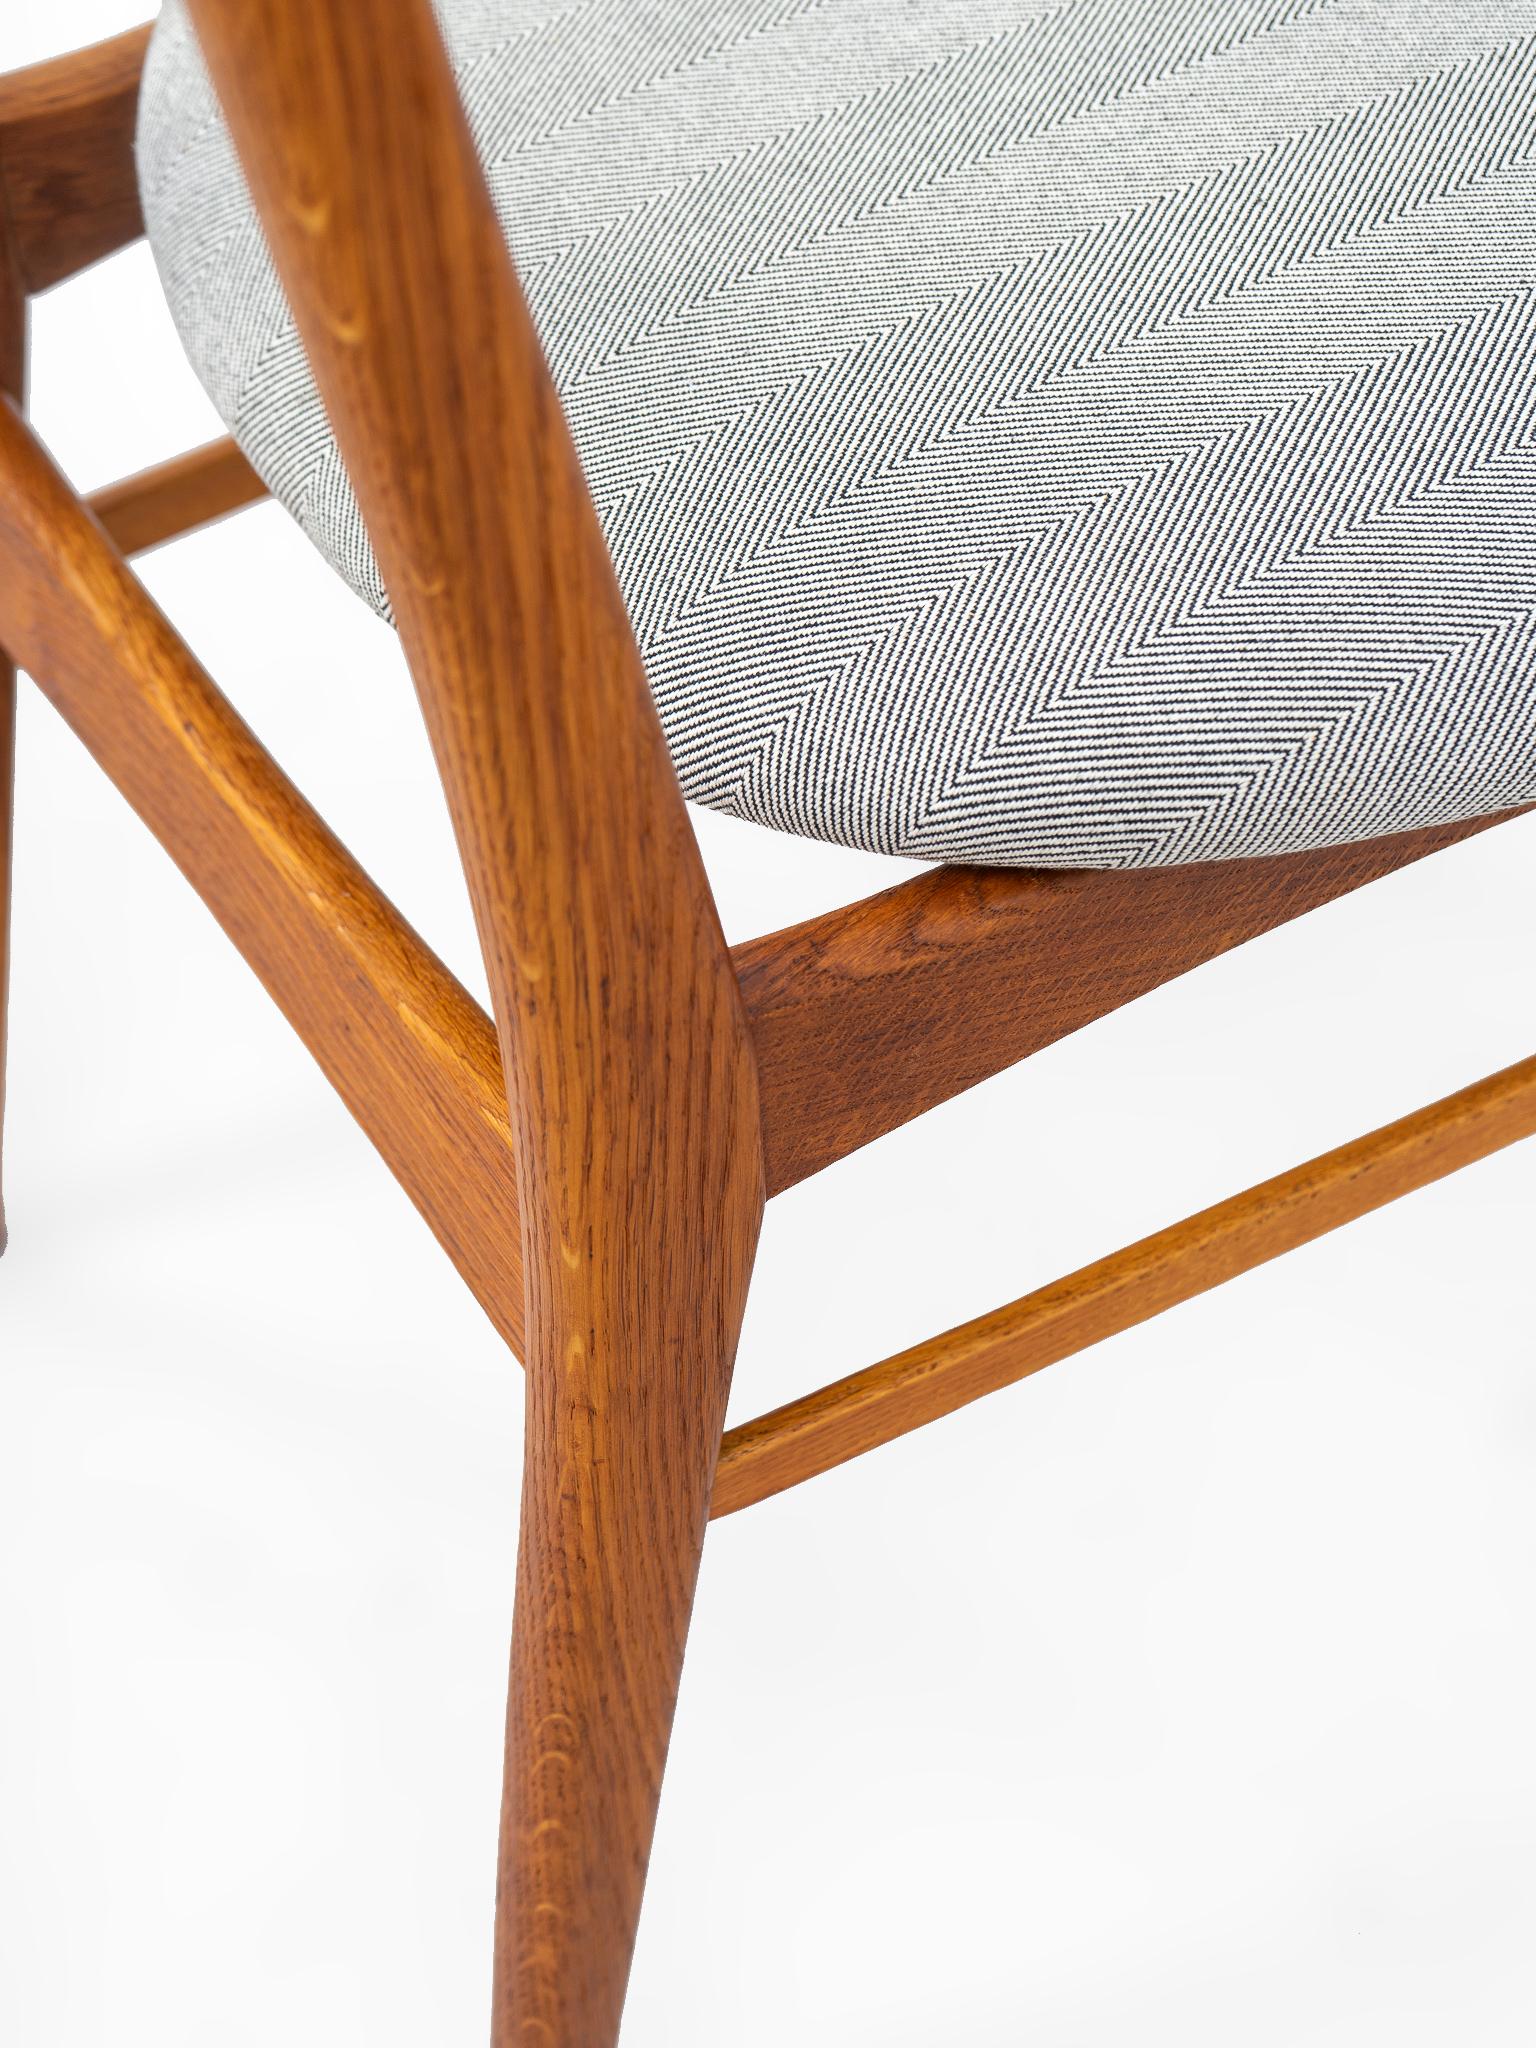 20th Century Pair of Danish Chairs Made of Teak, circa 1960 For Sale